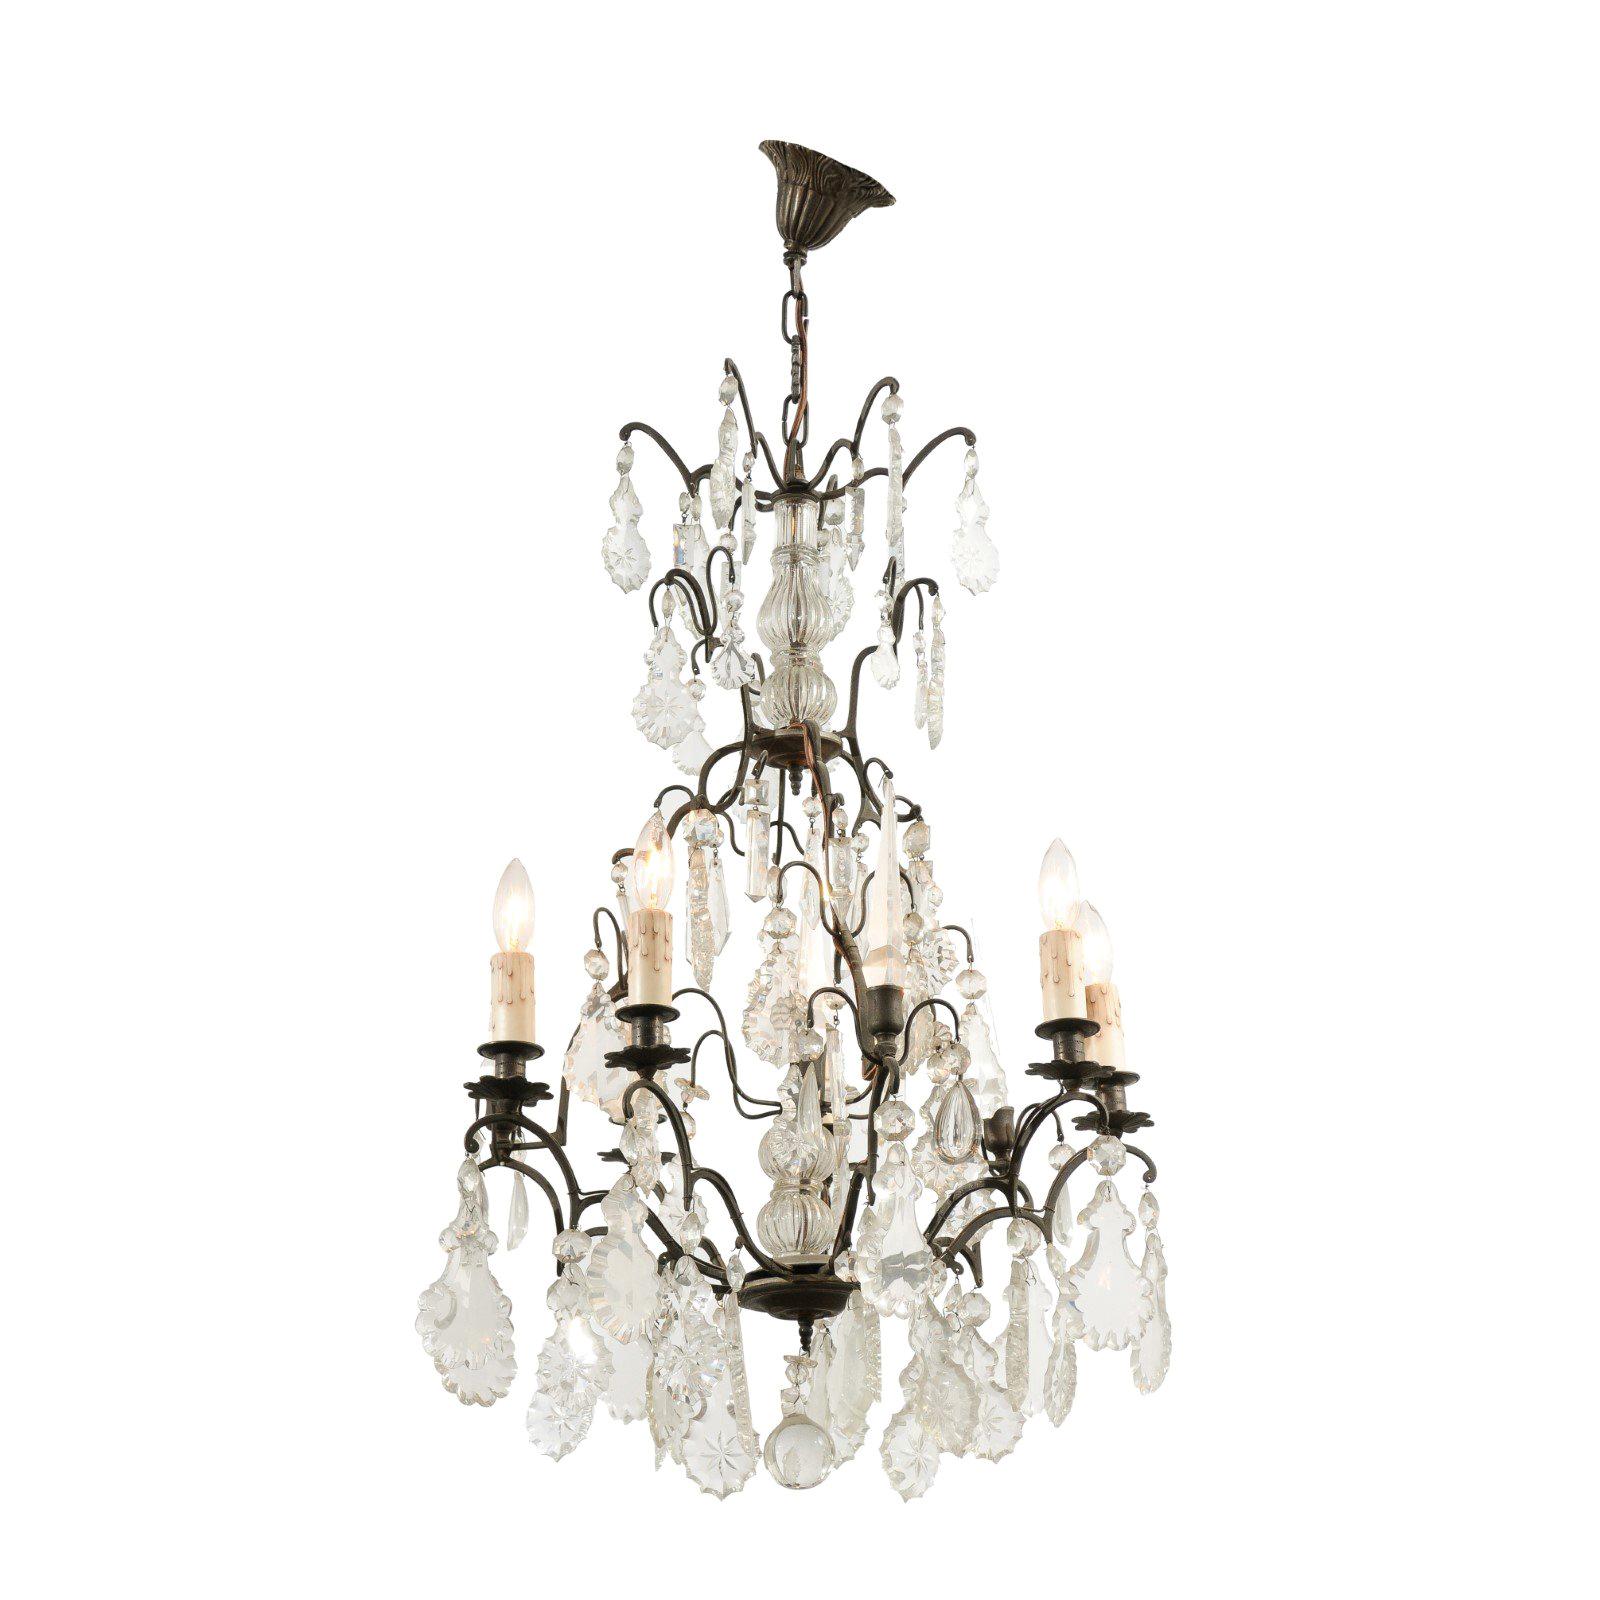 French Six-Light Crystal Chandelier with Iron Armature, Pendeloques and Obelisks For Sale